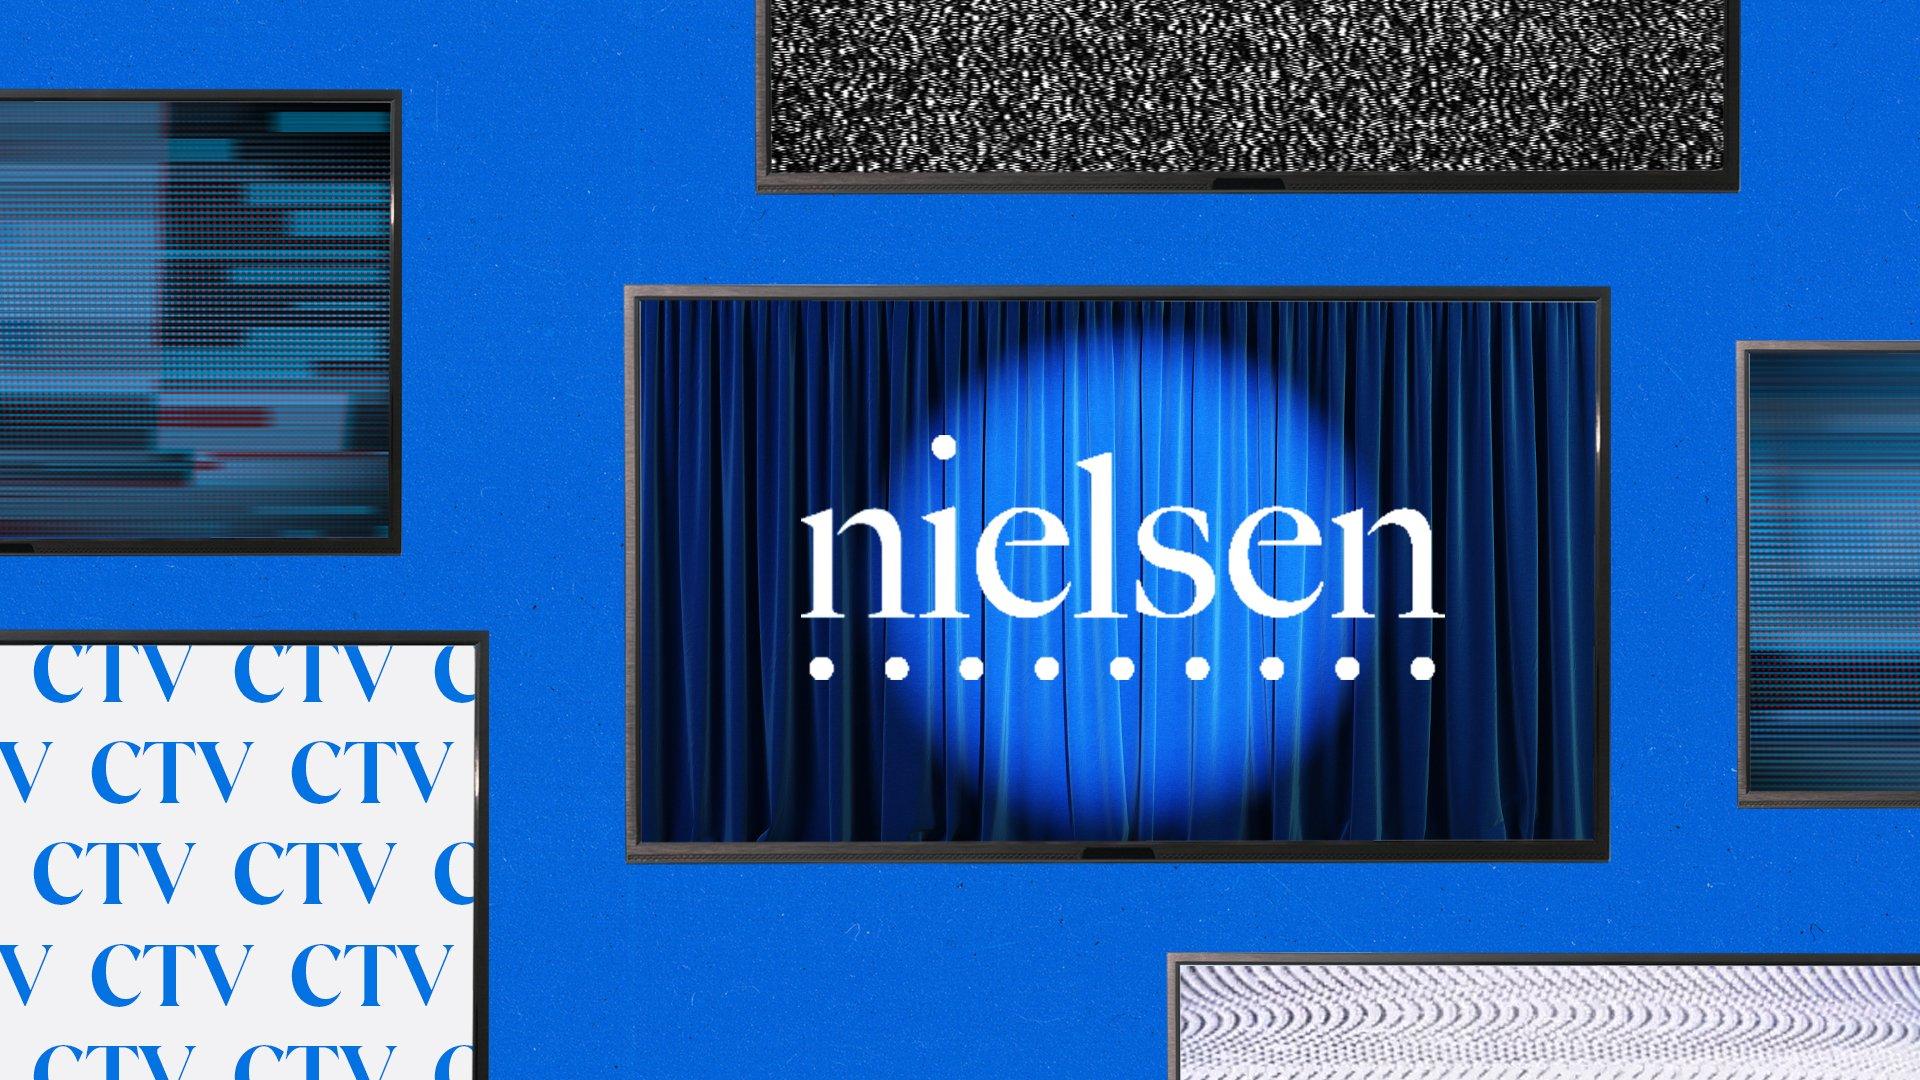 SVOD vs AVOD and other takeaways from Nielsen’s CTV Summit